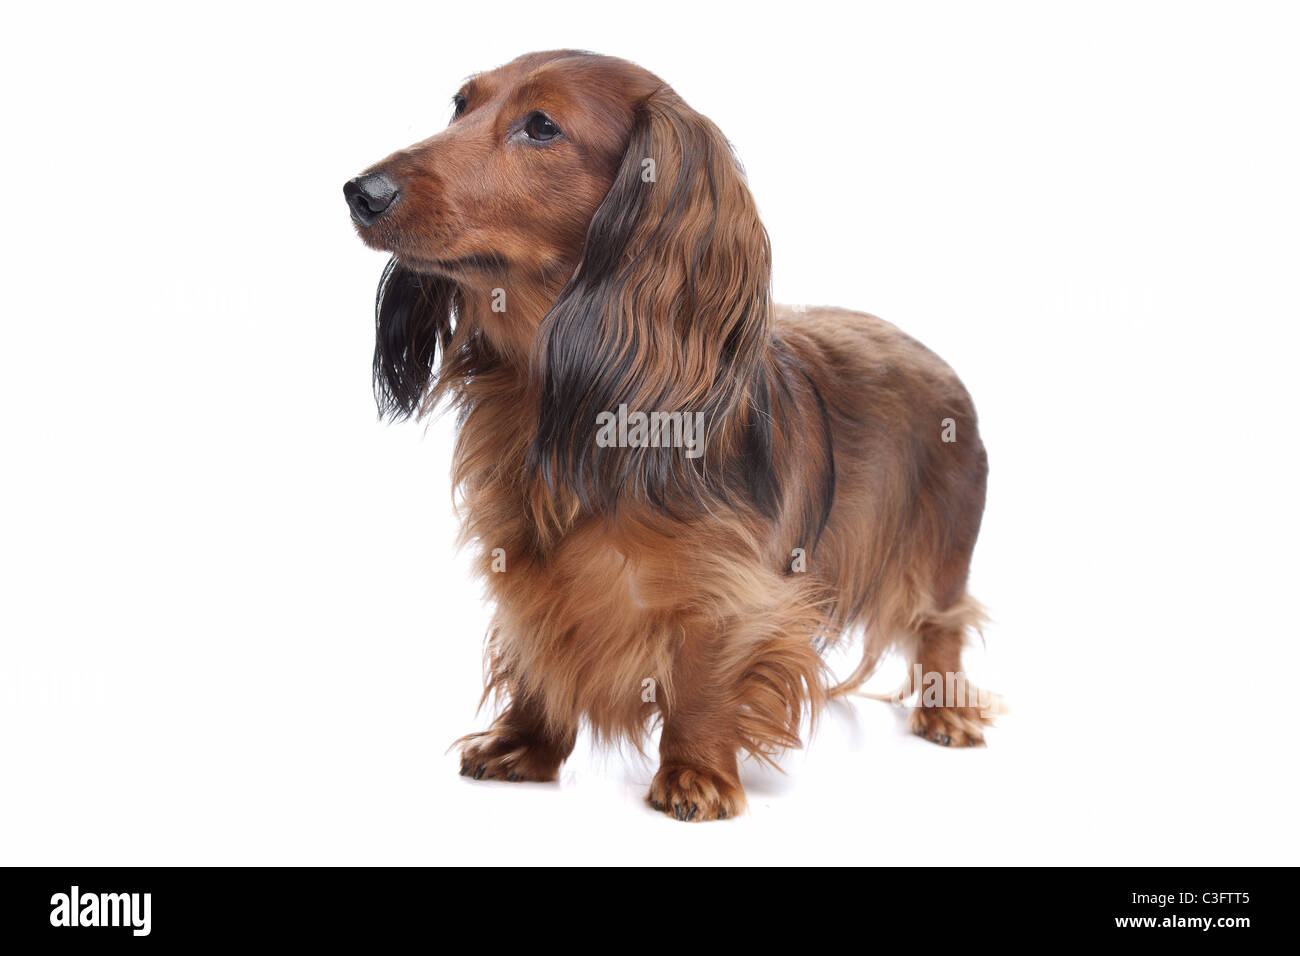 standard long haired Dachshund in front of a white background Stock Photo